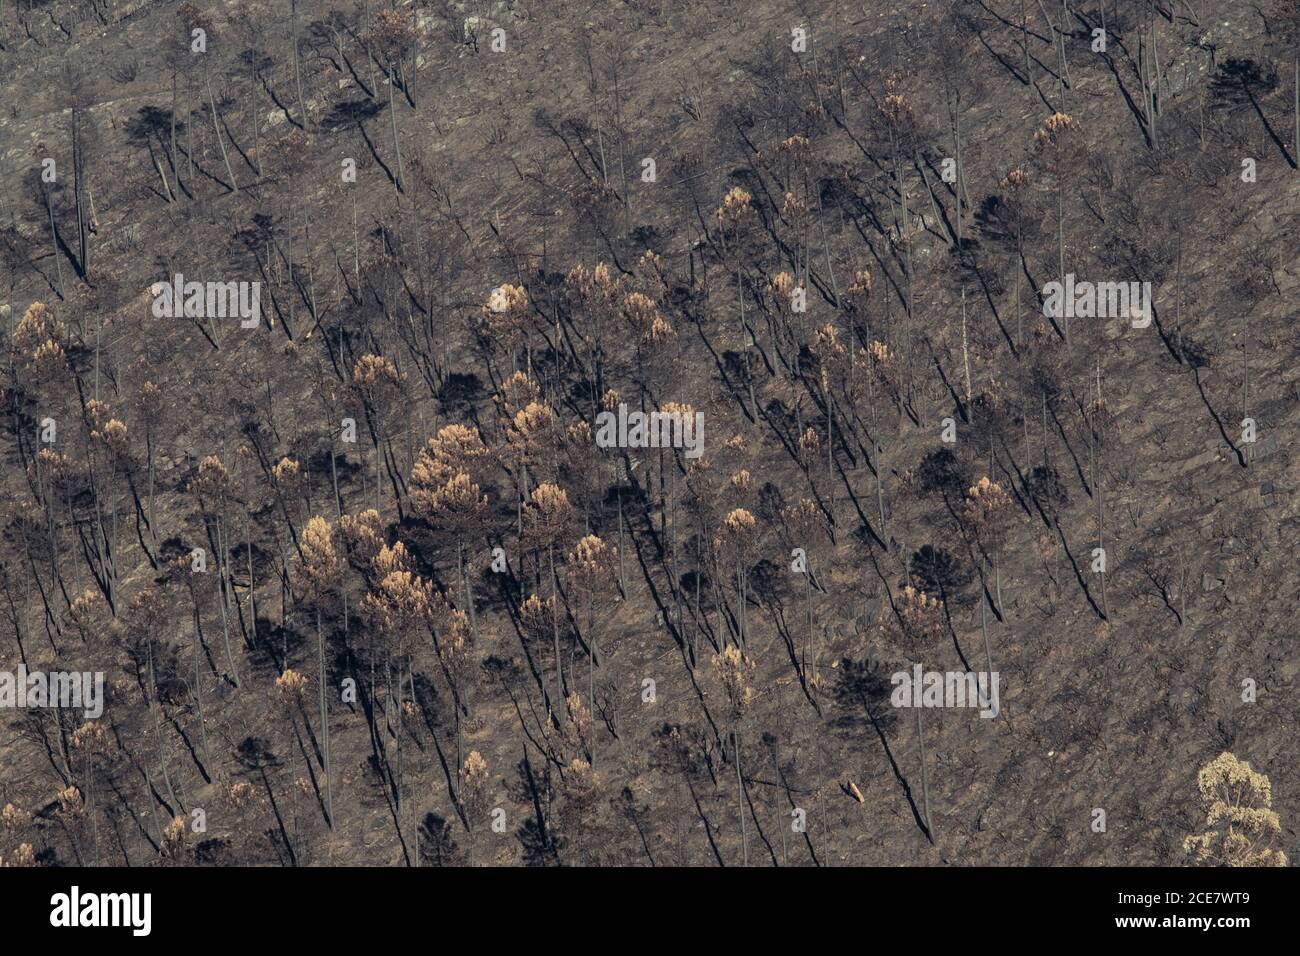 Drone view of lifeless trees and dried grass in forest after destructive fire Stock Photo